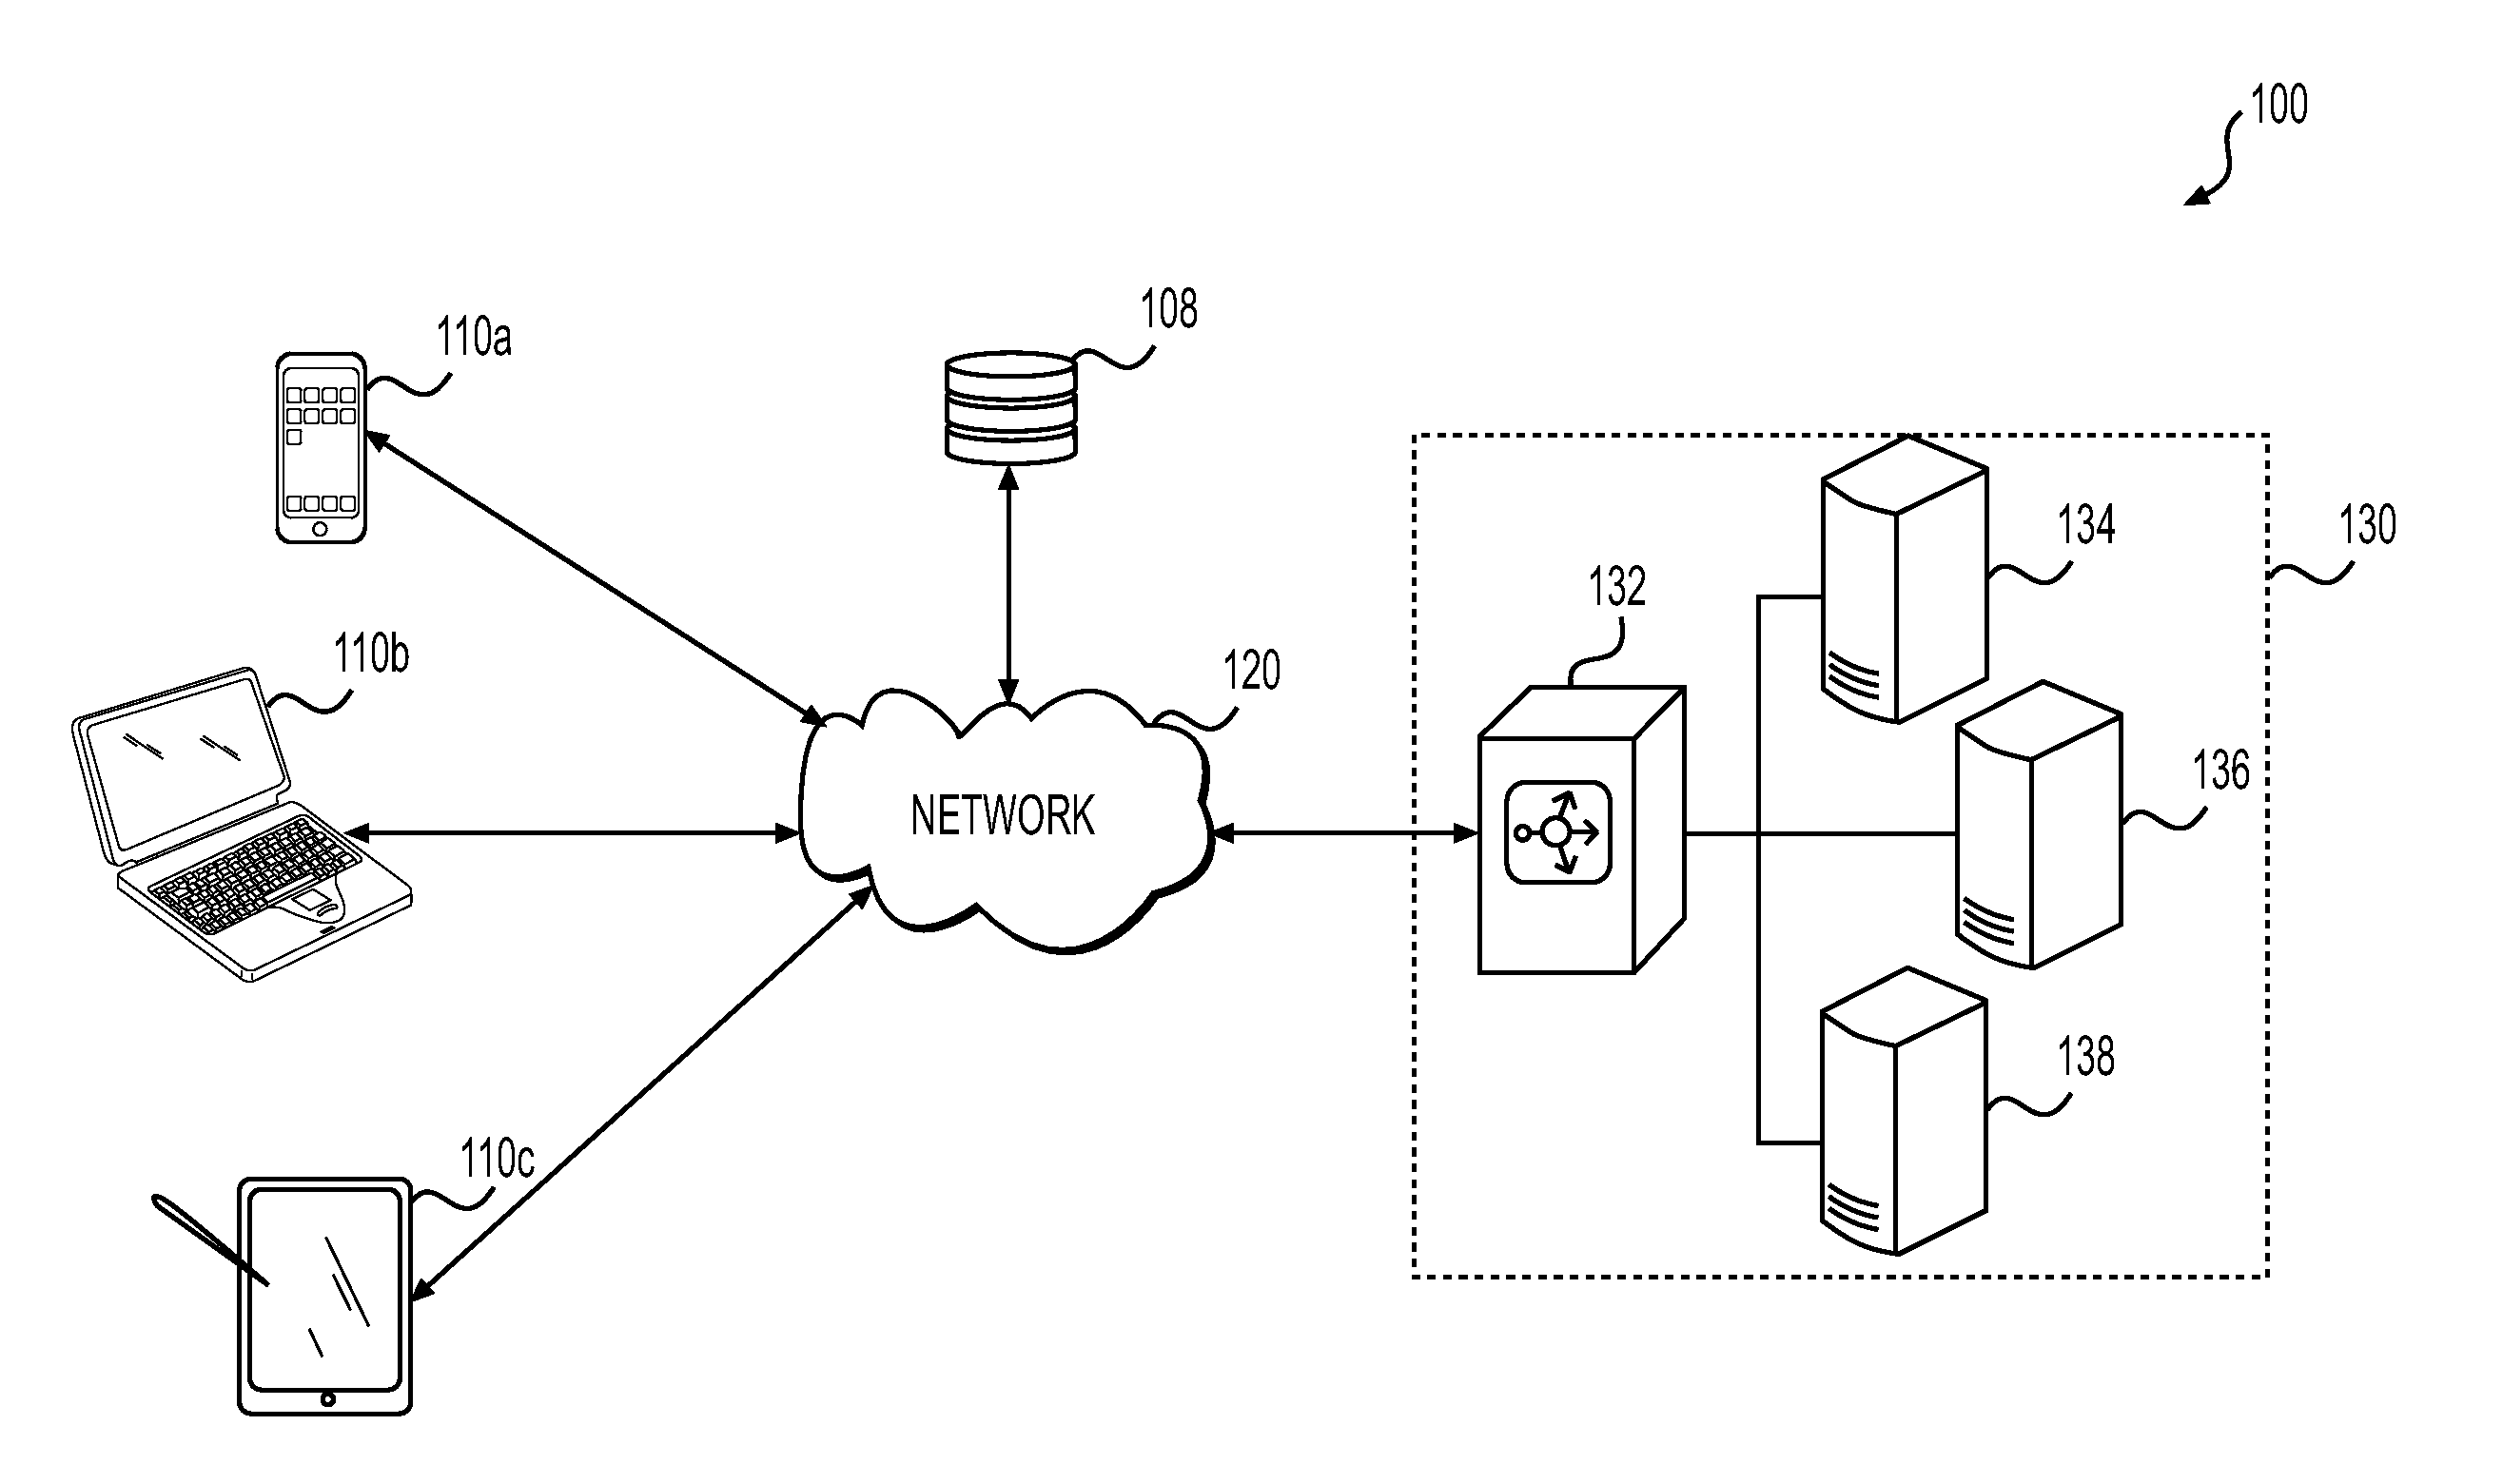 Systems and methods for directly responding to distributed network traffic